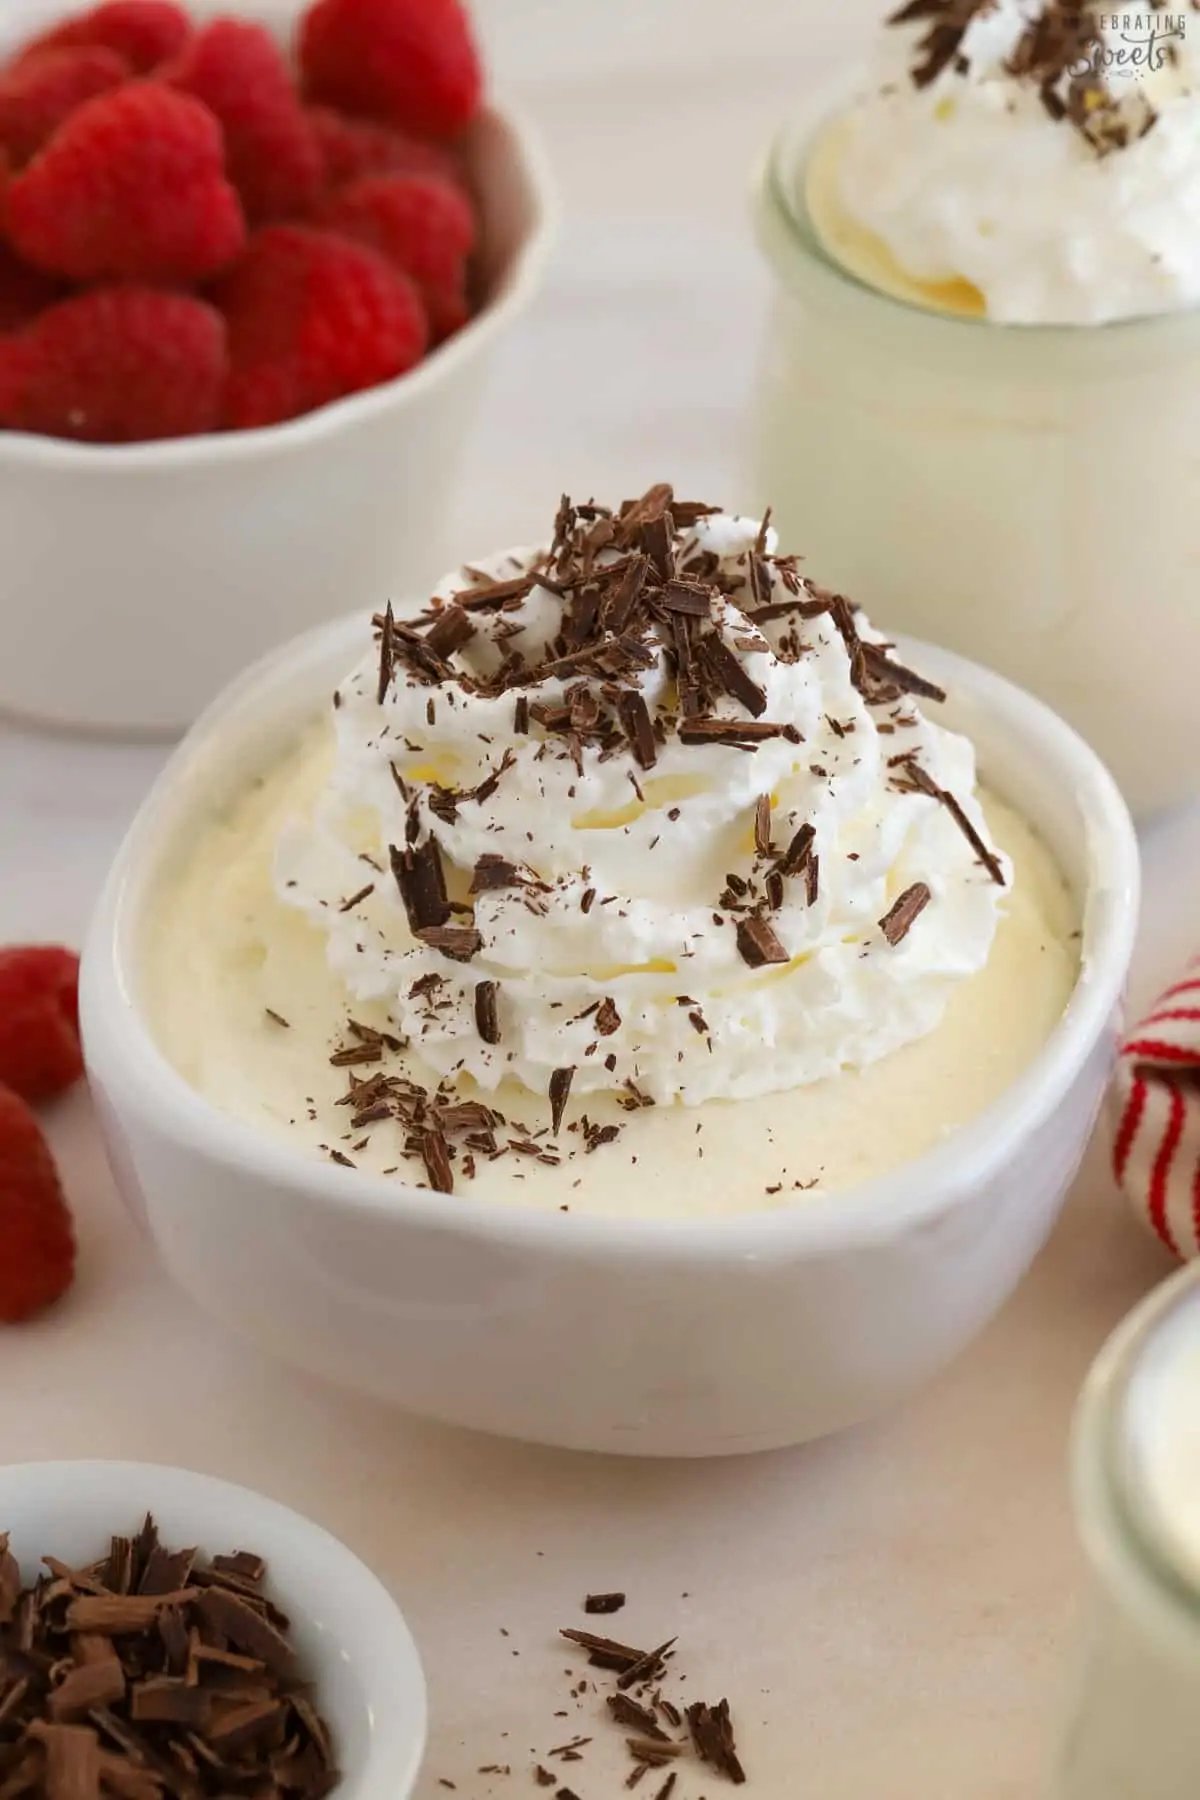 White chocolate mousse topped with whipped cream and chocolate shavings.